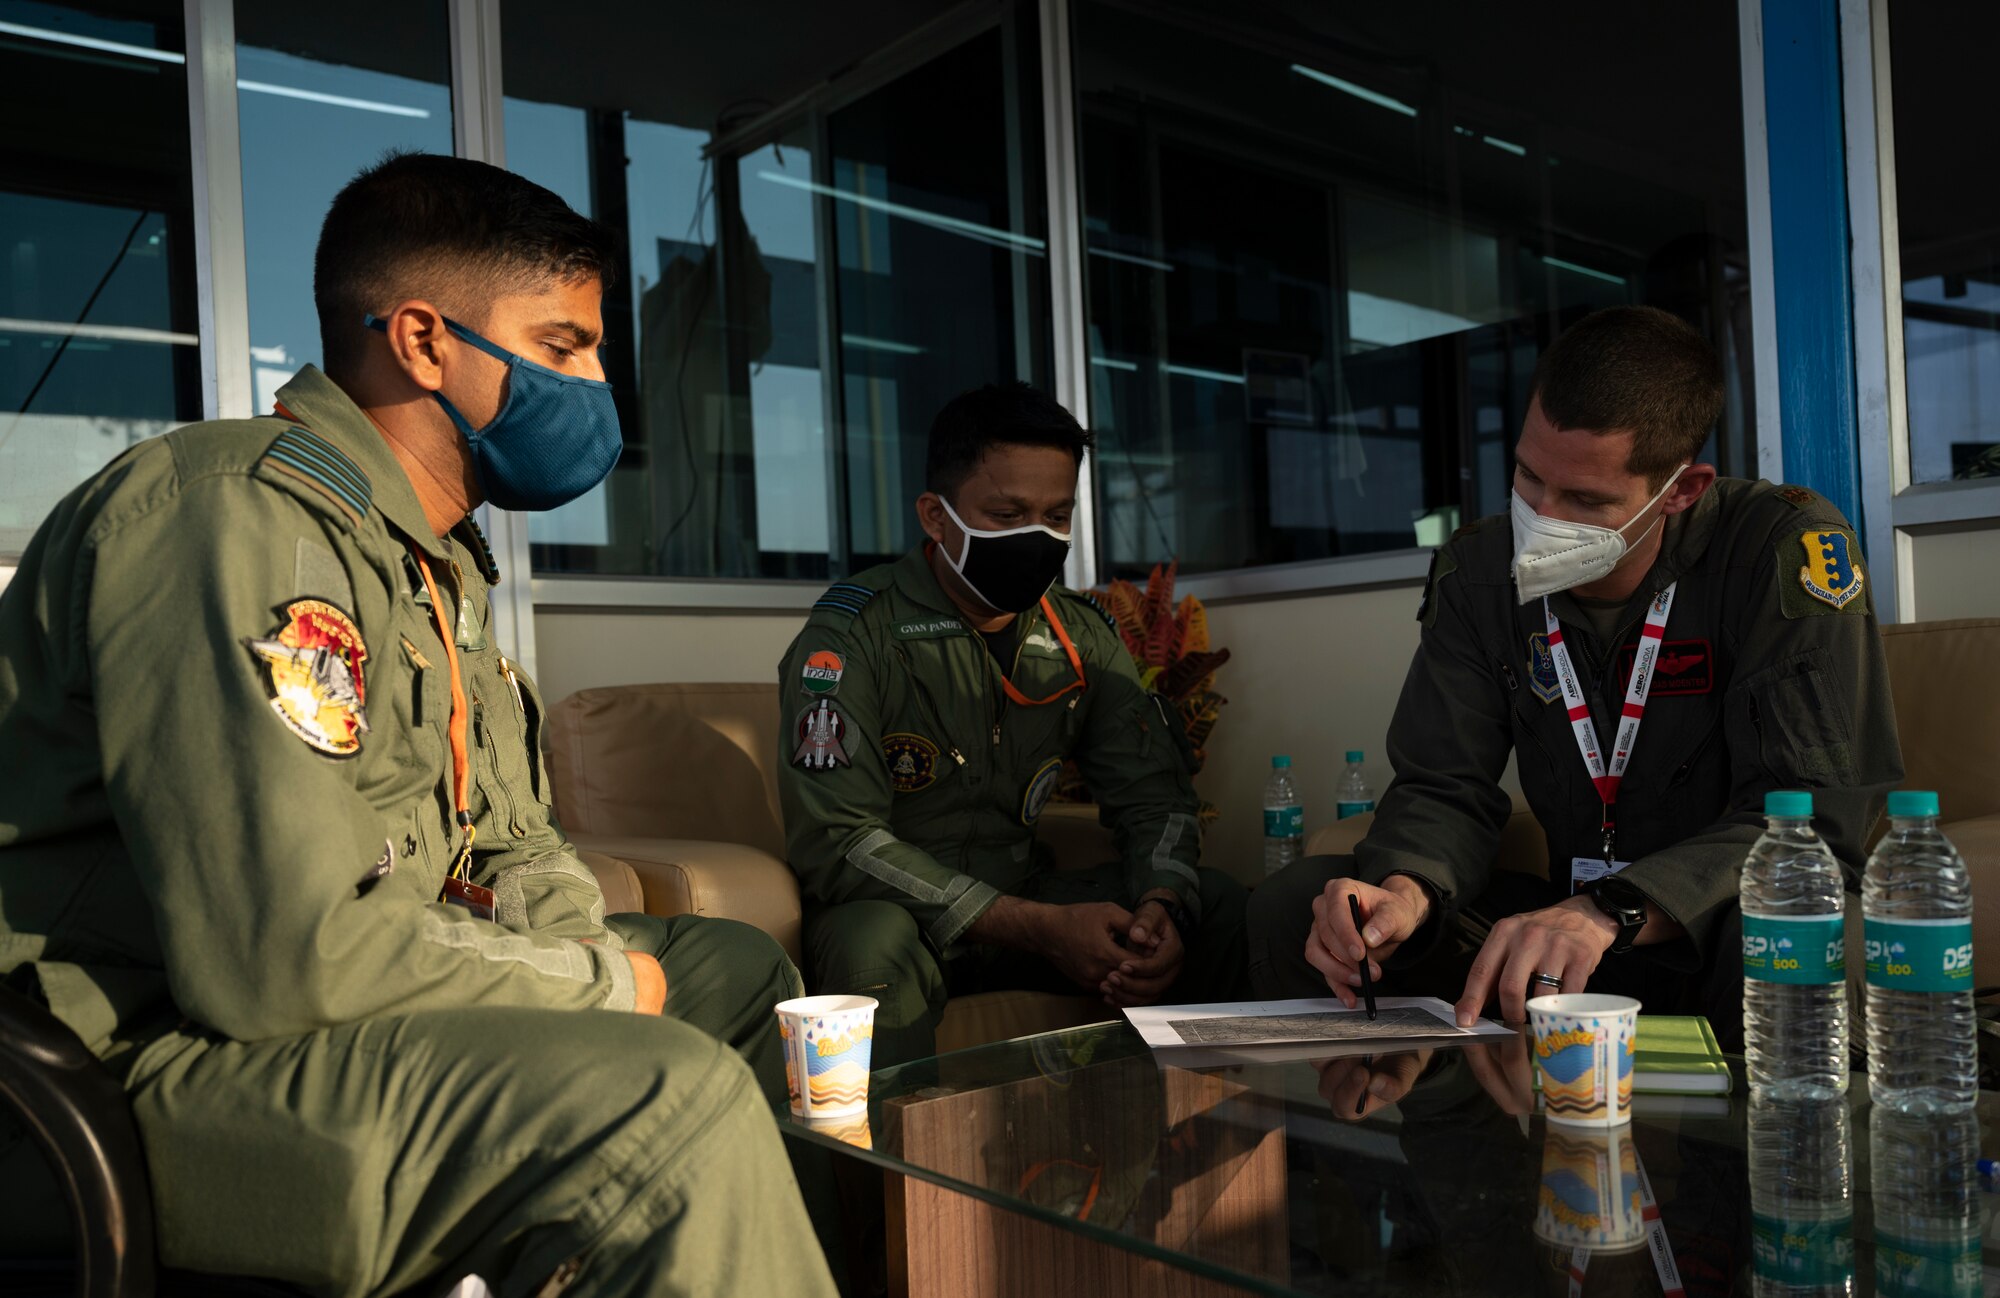 Maj. Andrew Moenter, a 34th Expeditionary Bomb Squadron pilot, meets with Indian Air Force pilots in preparation of the B-1B Lancer’s participation in Aero India 2021, at Yelahanka Air Force Base in Bengaluru, India, Feb. 1, 2021. Aero India is an ideal forum to showcase U.S. defense aircraft and equipment and ultimately contribute toward compatibility and interoperability with other countries. (U.S. Air Force photo by Senior Airman Christina Bennett)